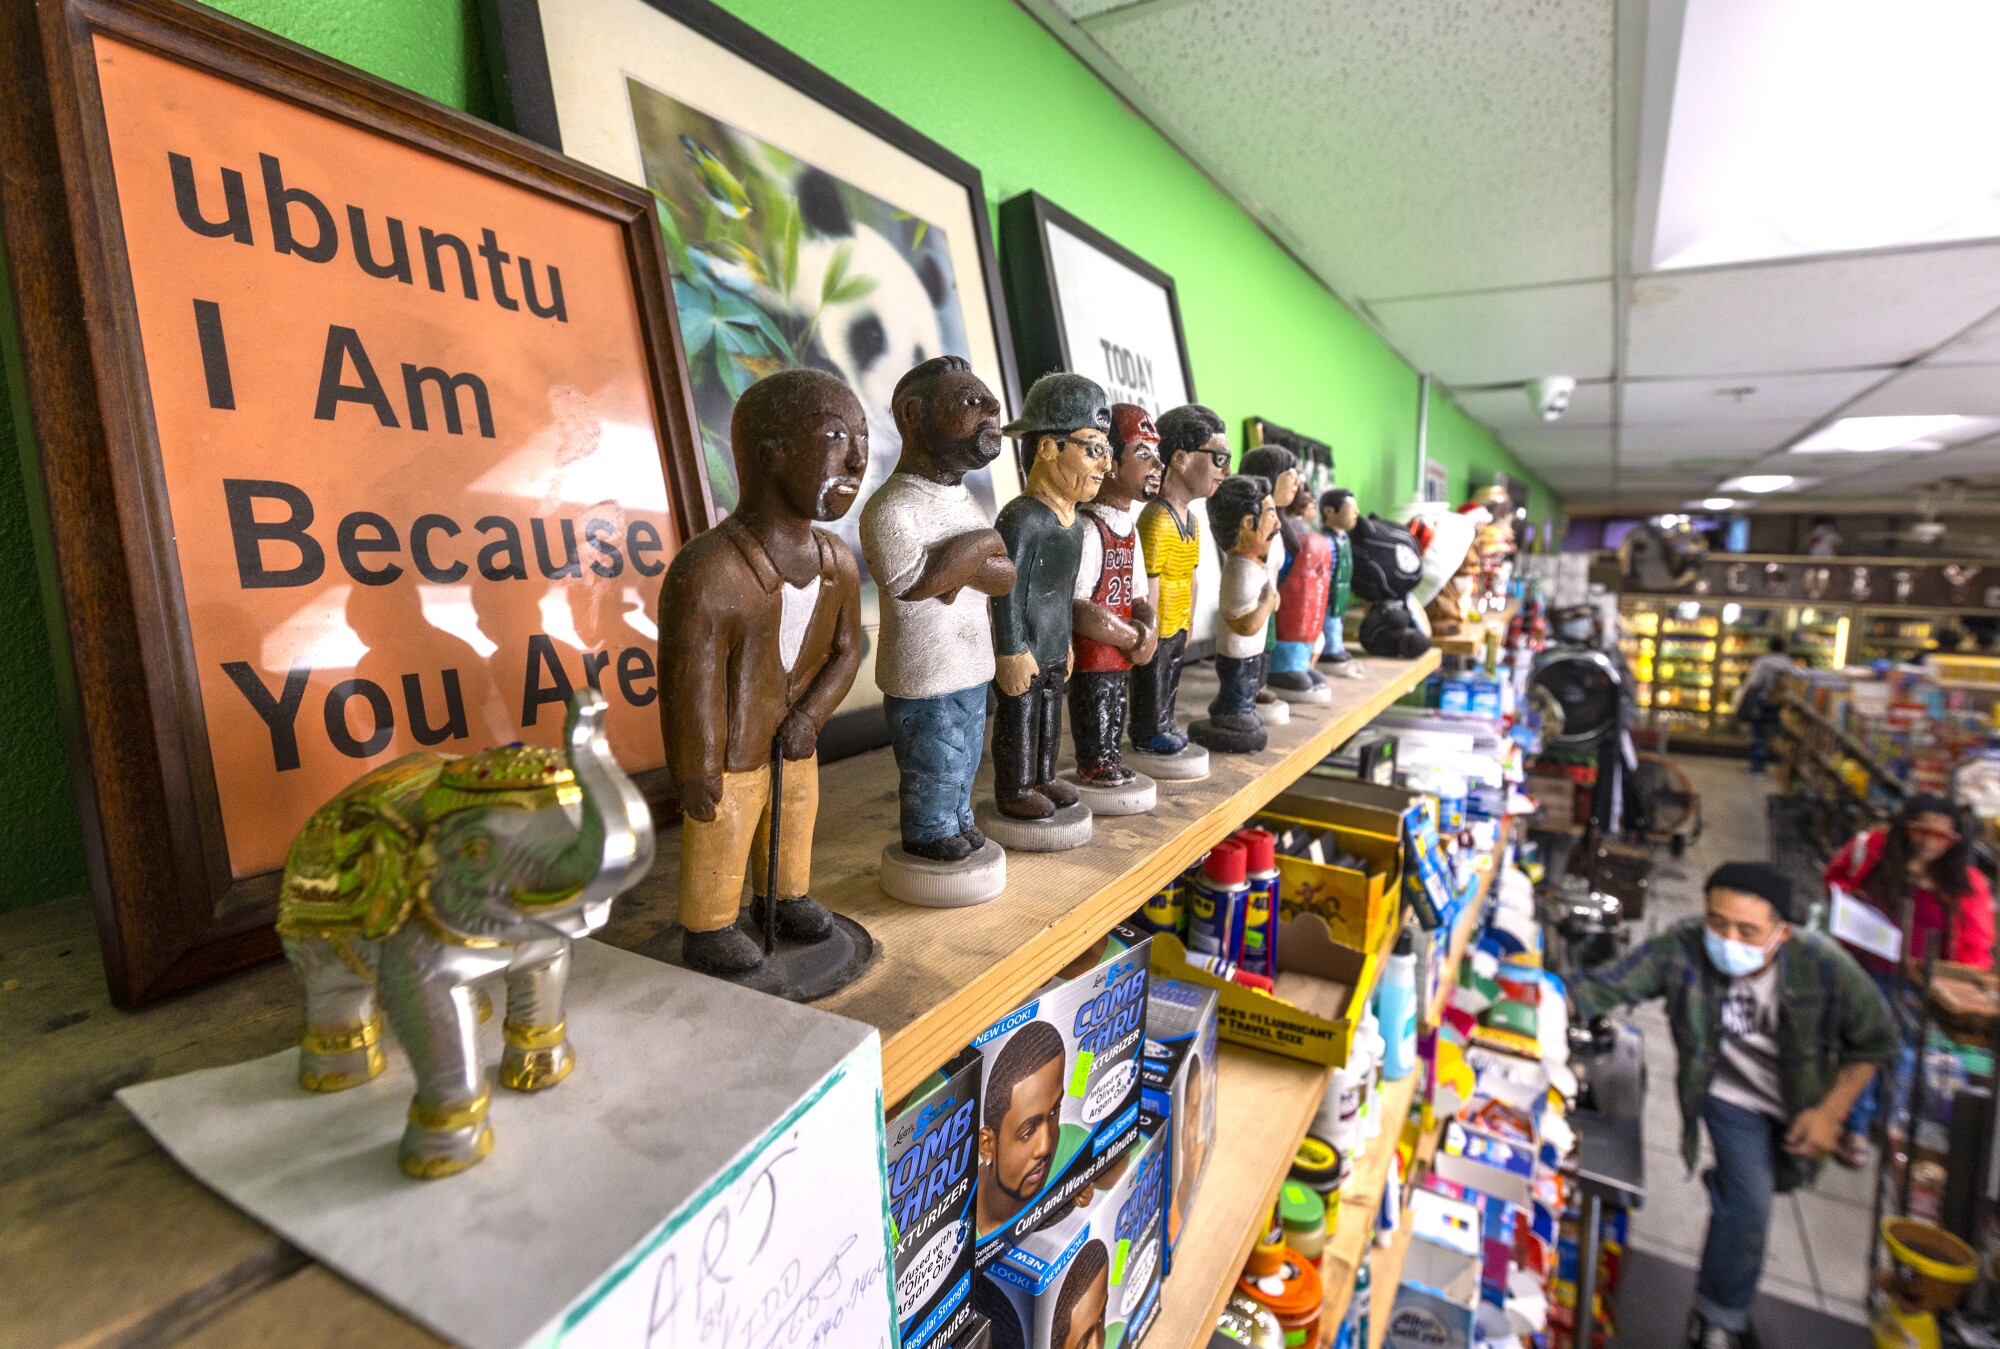 A view of claymation figures made by a local artist of store employees on the shelf 